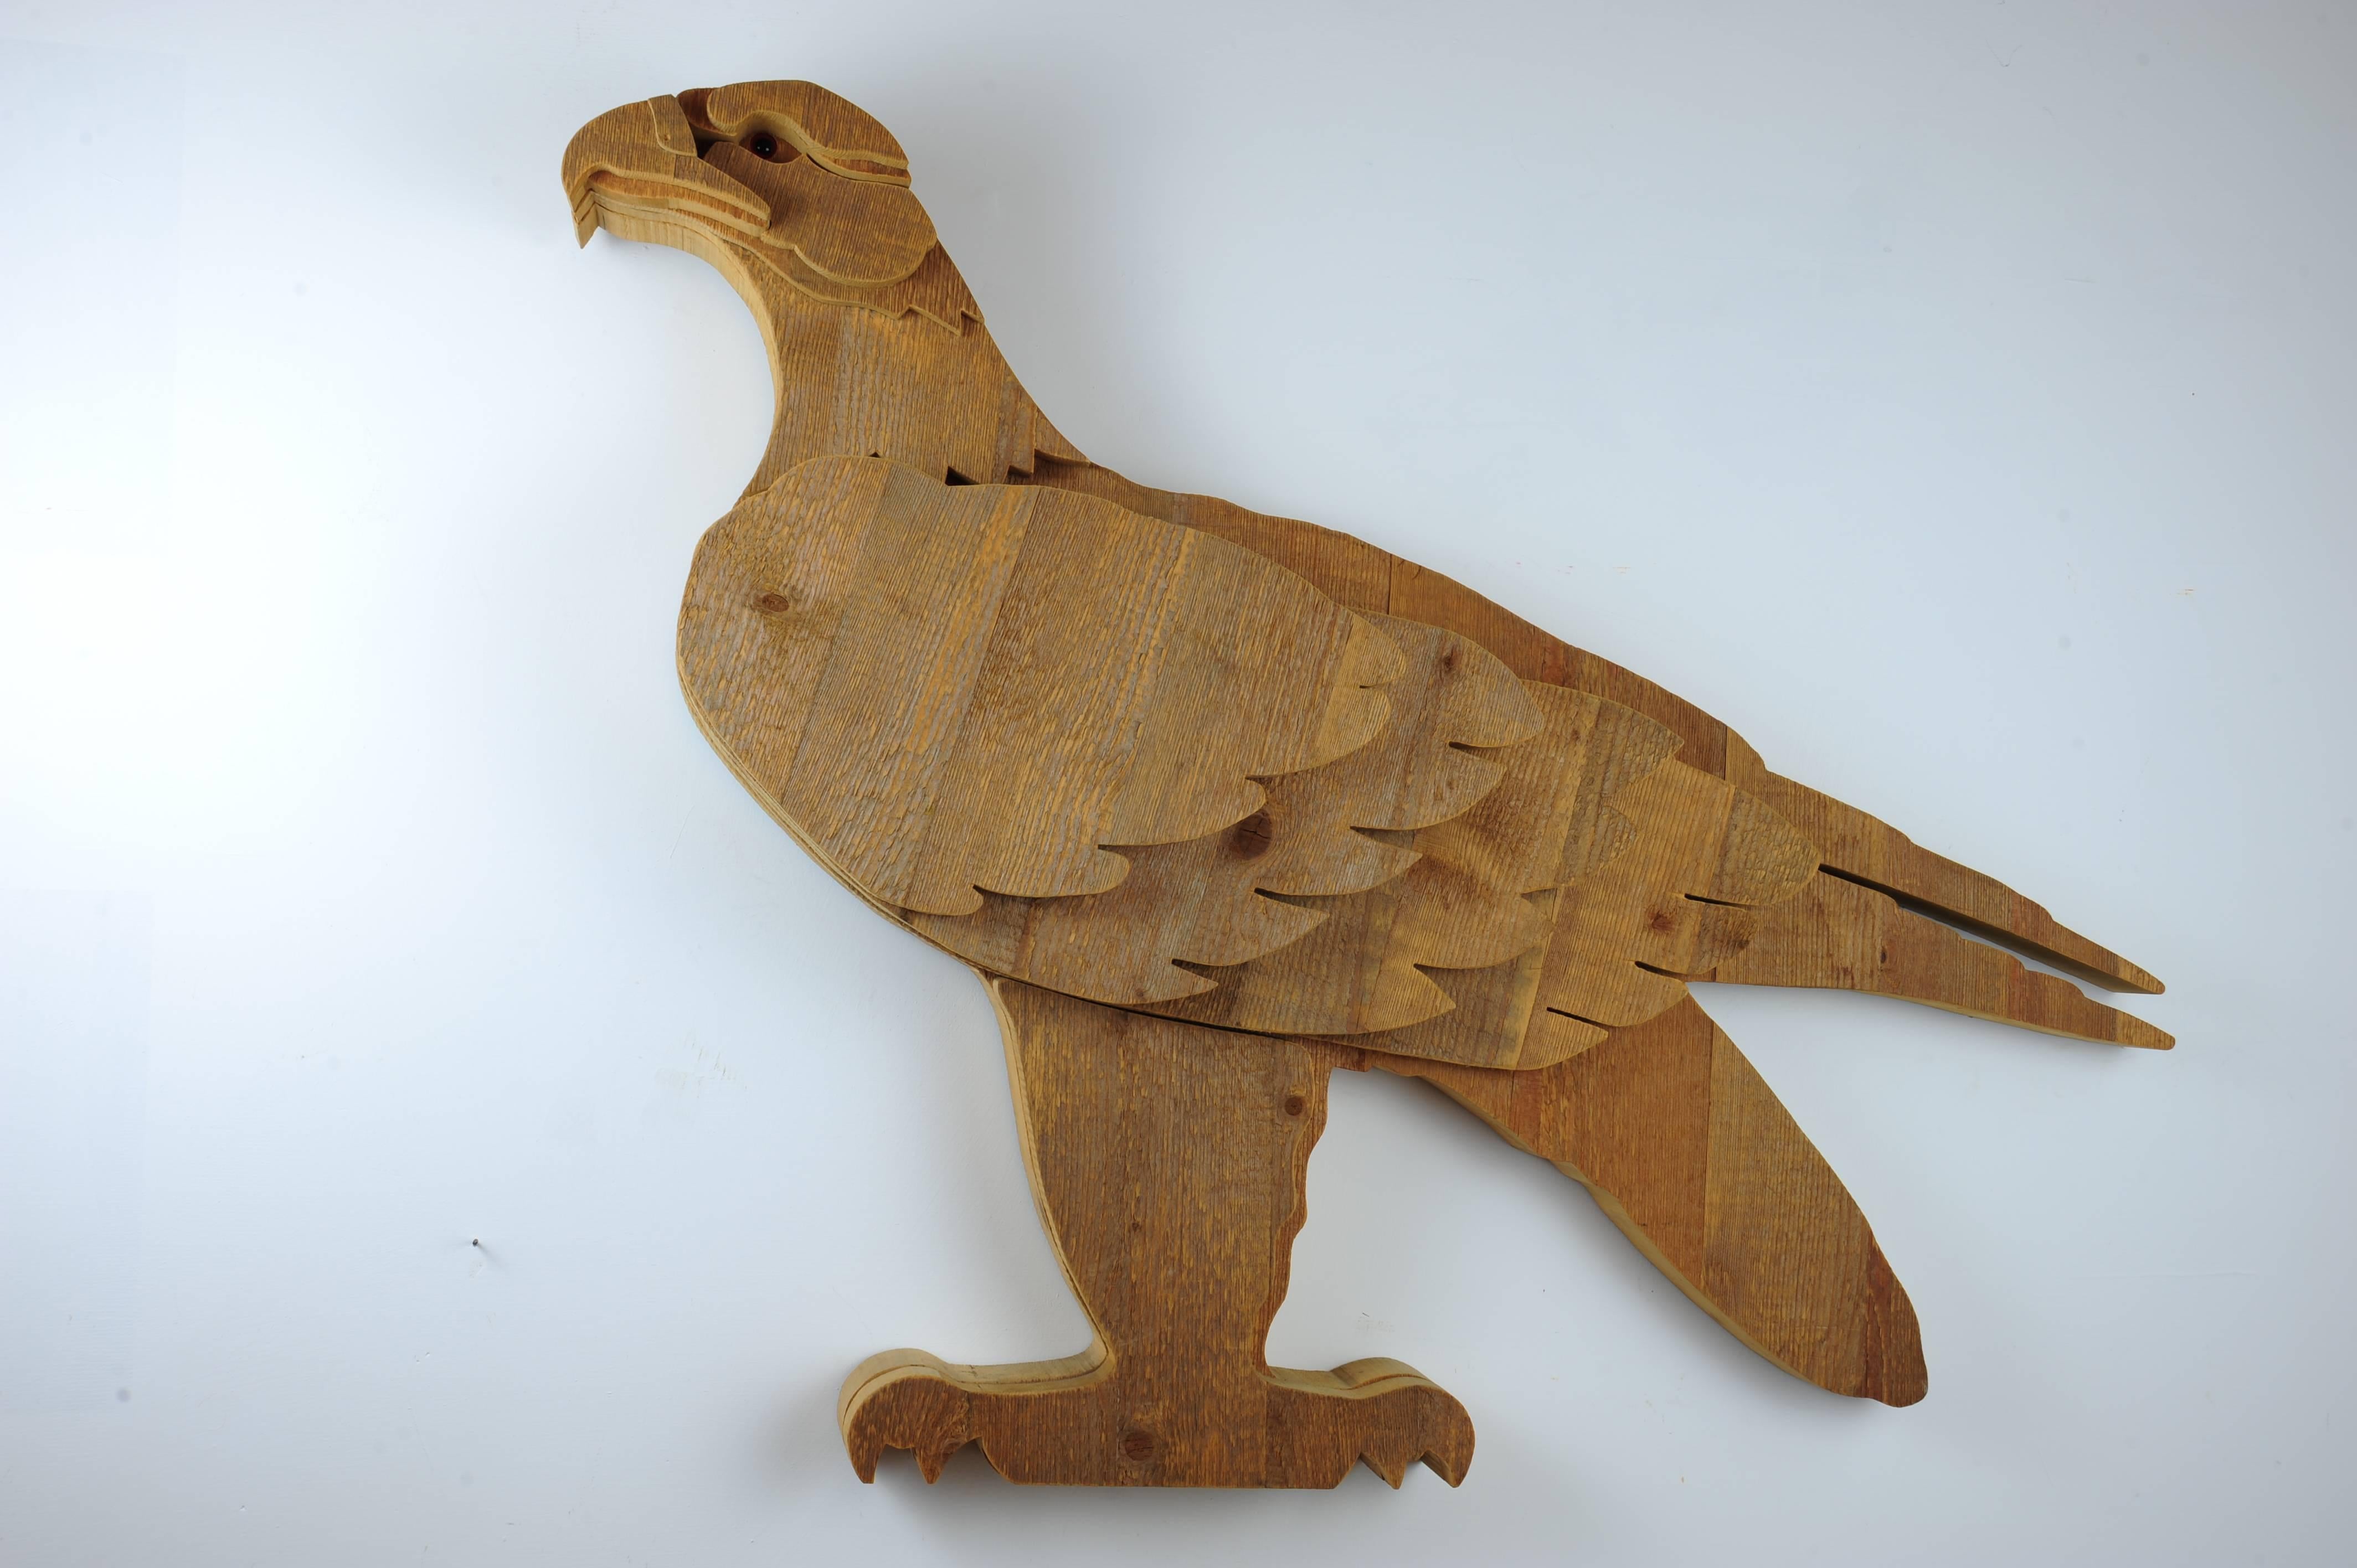 Marvellous eagle sculpture designed and made in Italy by Michelangeli. Made in seasoned solid fir wood. This ageing technique of the fir, distinctive of the Bottega G. Michelangeli, take place outdoor and provides the wood a colorings that enhances